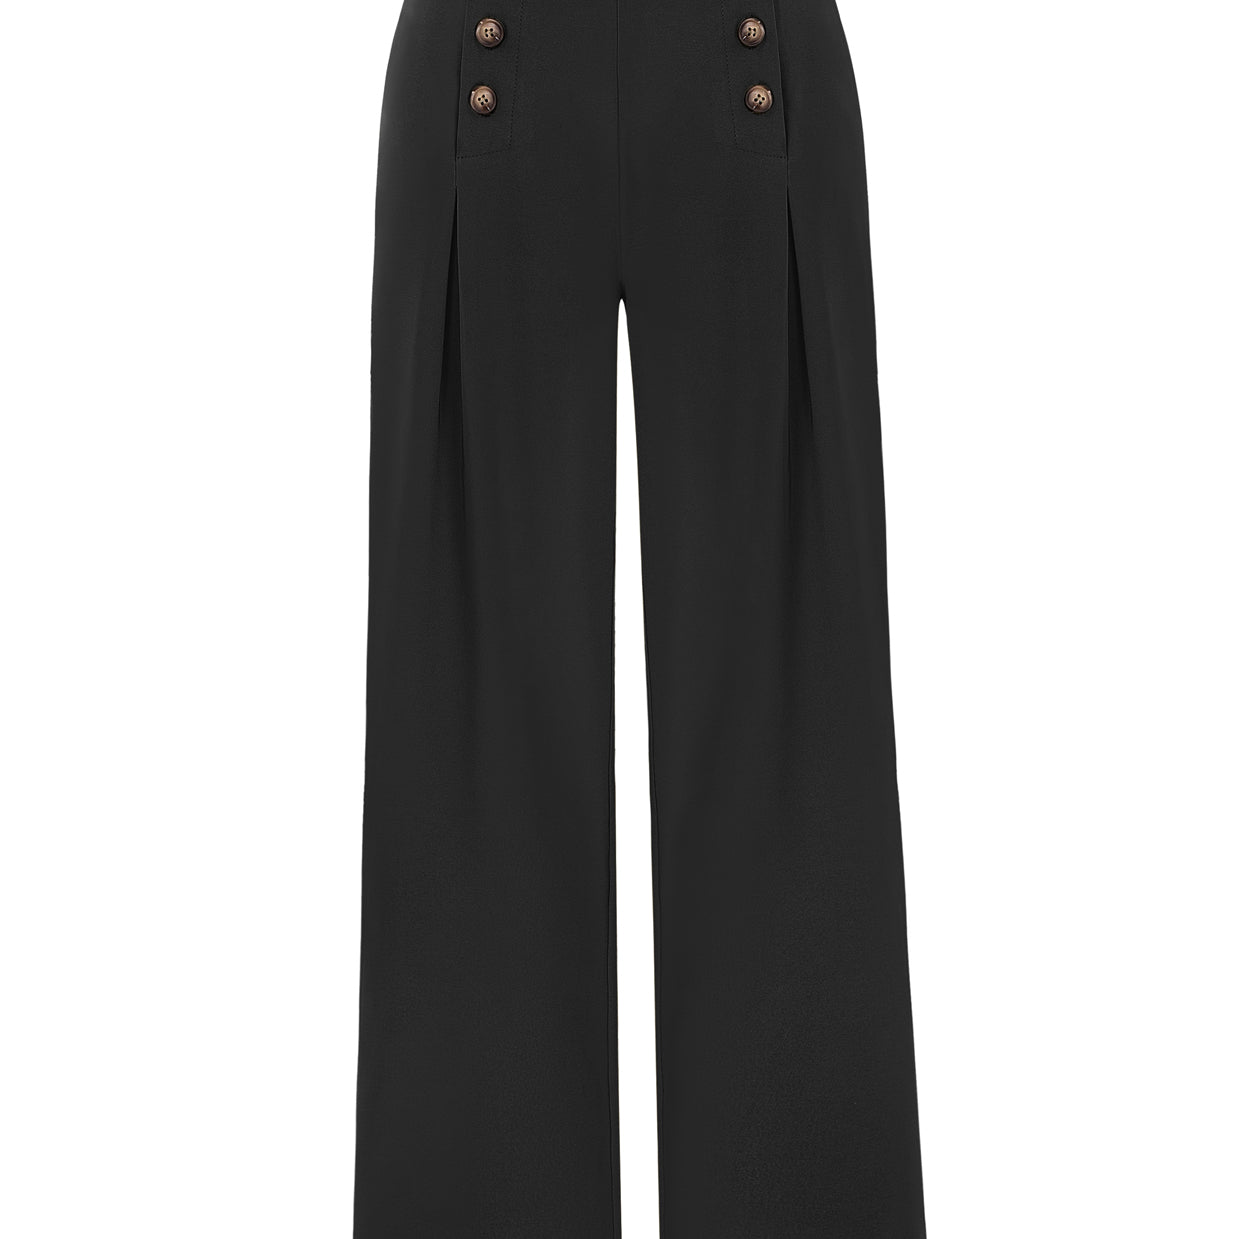 High Waisted Wide Leg Pants Button Decorated Casual Stretchy Trousers with Pockets